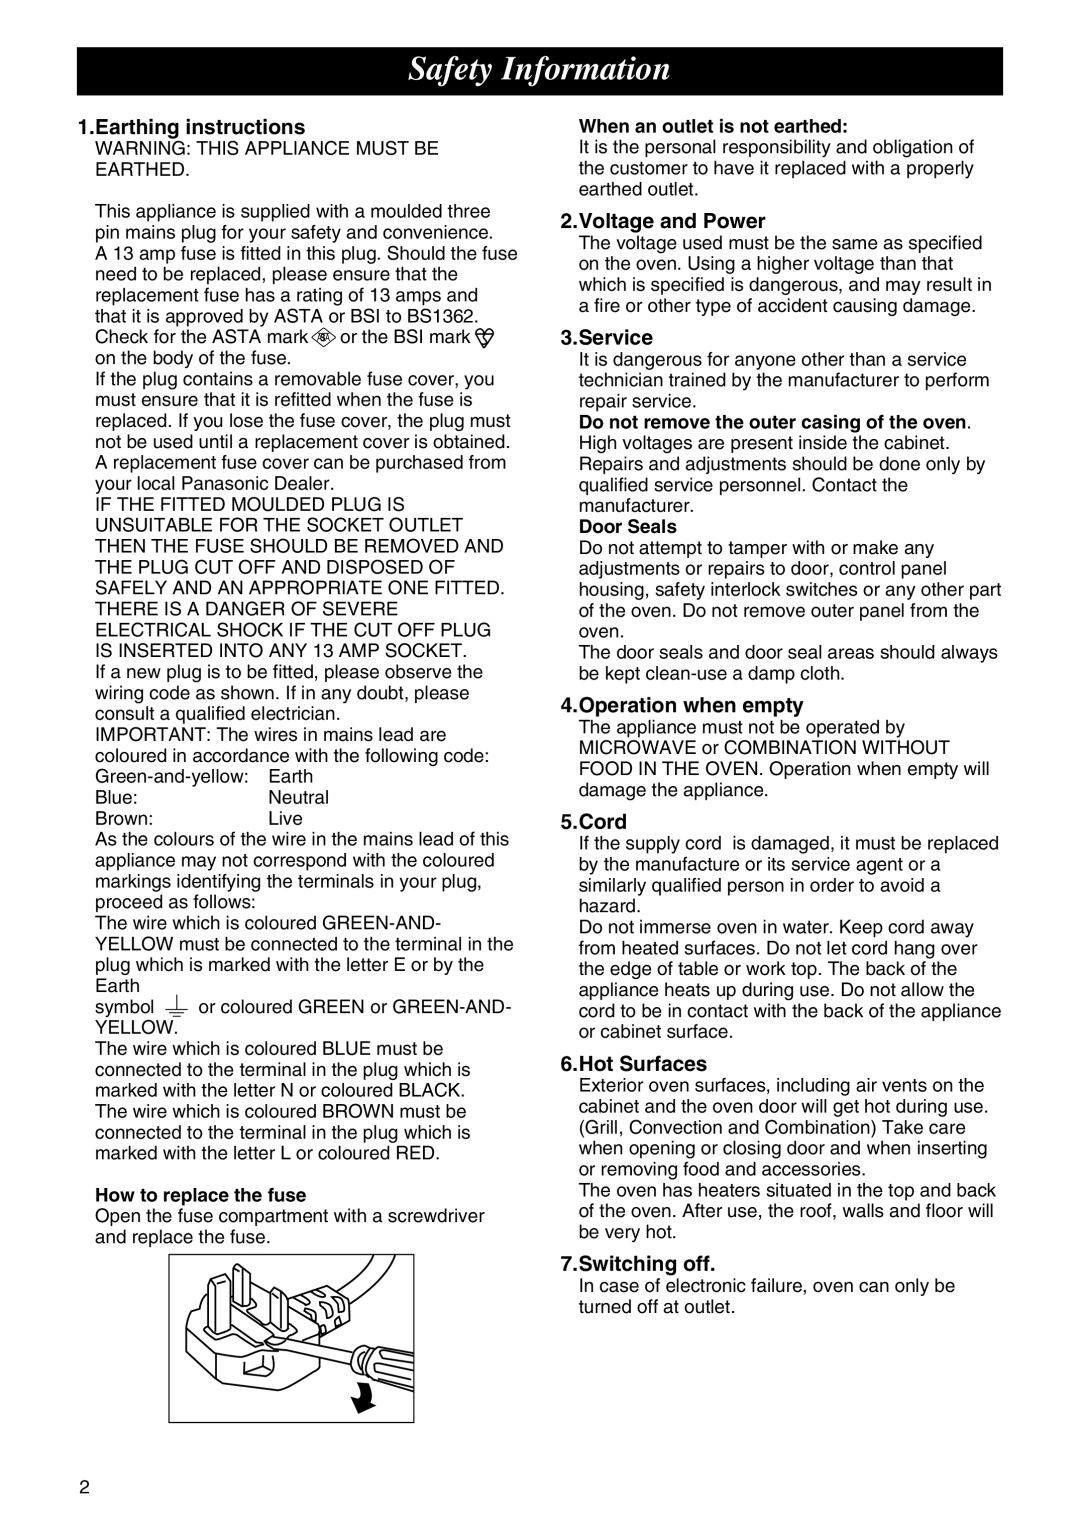 Panasonic NE-C1275 Safety Information, Earthing instructions, Voltage and Power, Service, Operation when empty, Cord 